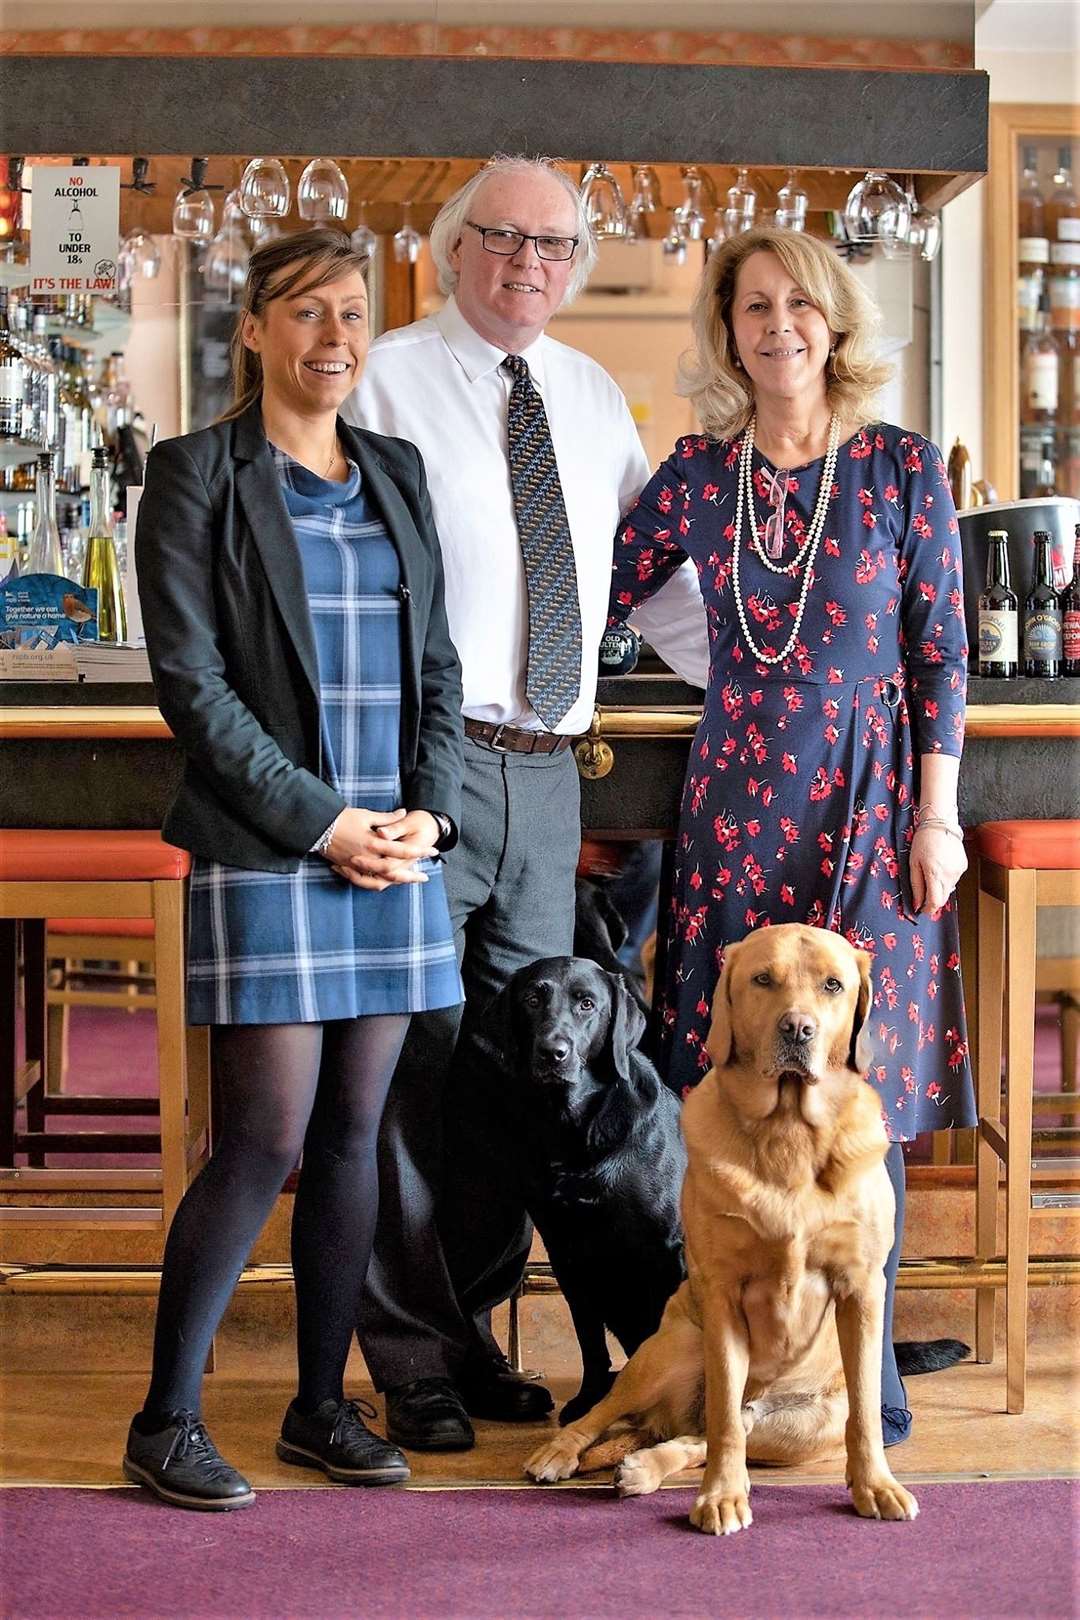 The Lamont family at Mackays Hotel are, from left, Jennifer, Murray and Ellie together with dogs Bria (black) and Max (red).